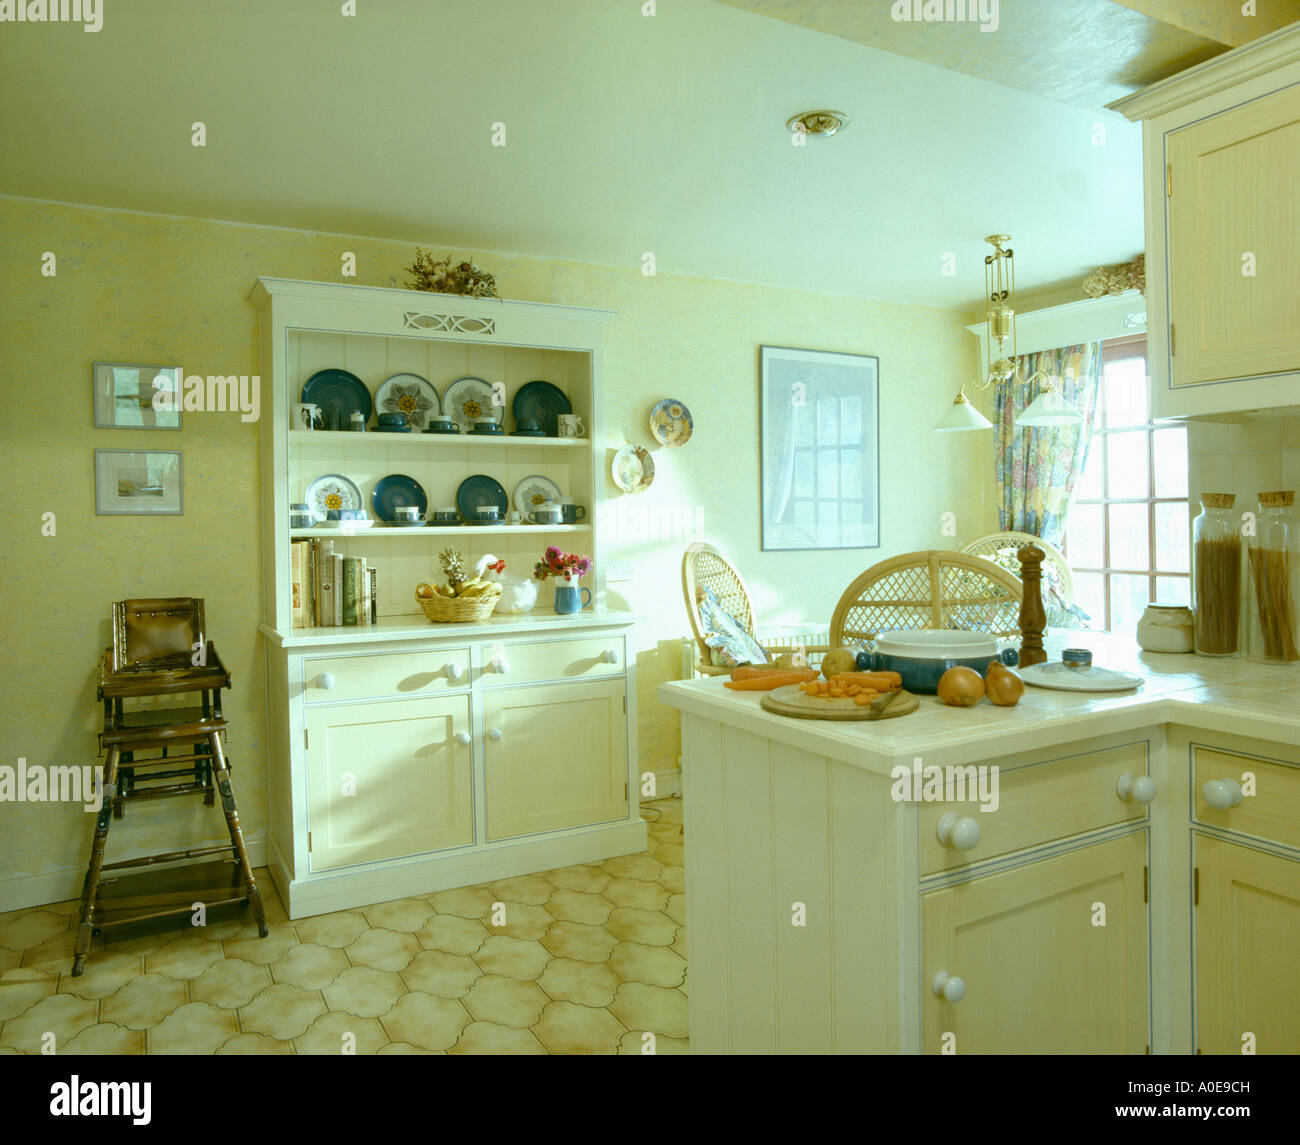 Yellow Kitchen With Painted Dresser Stock Photo 9969376 Alamy